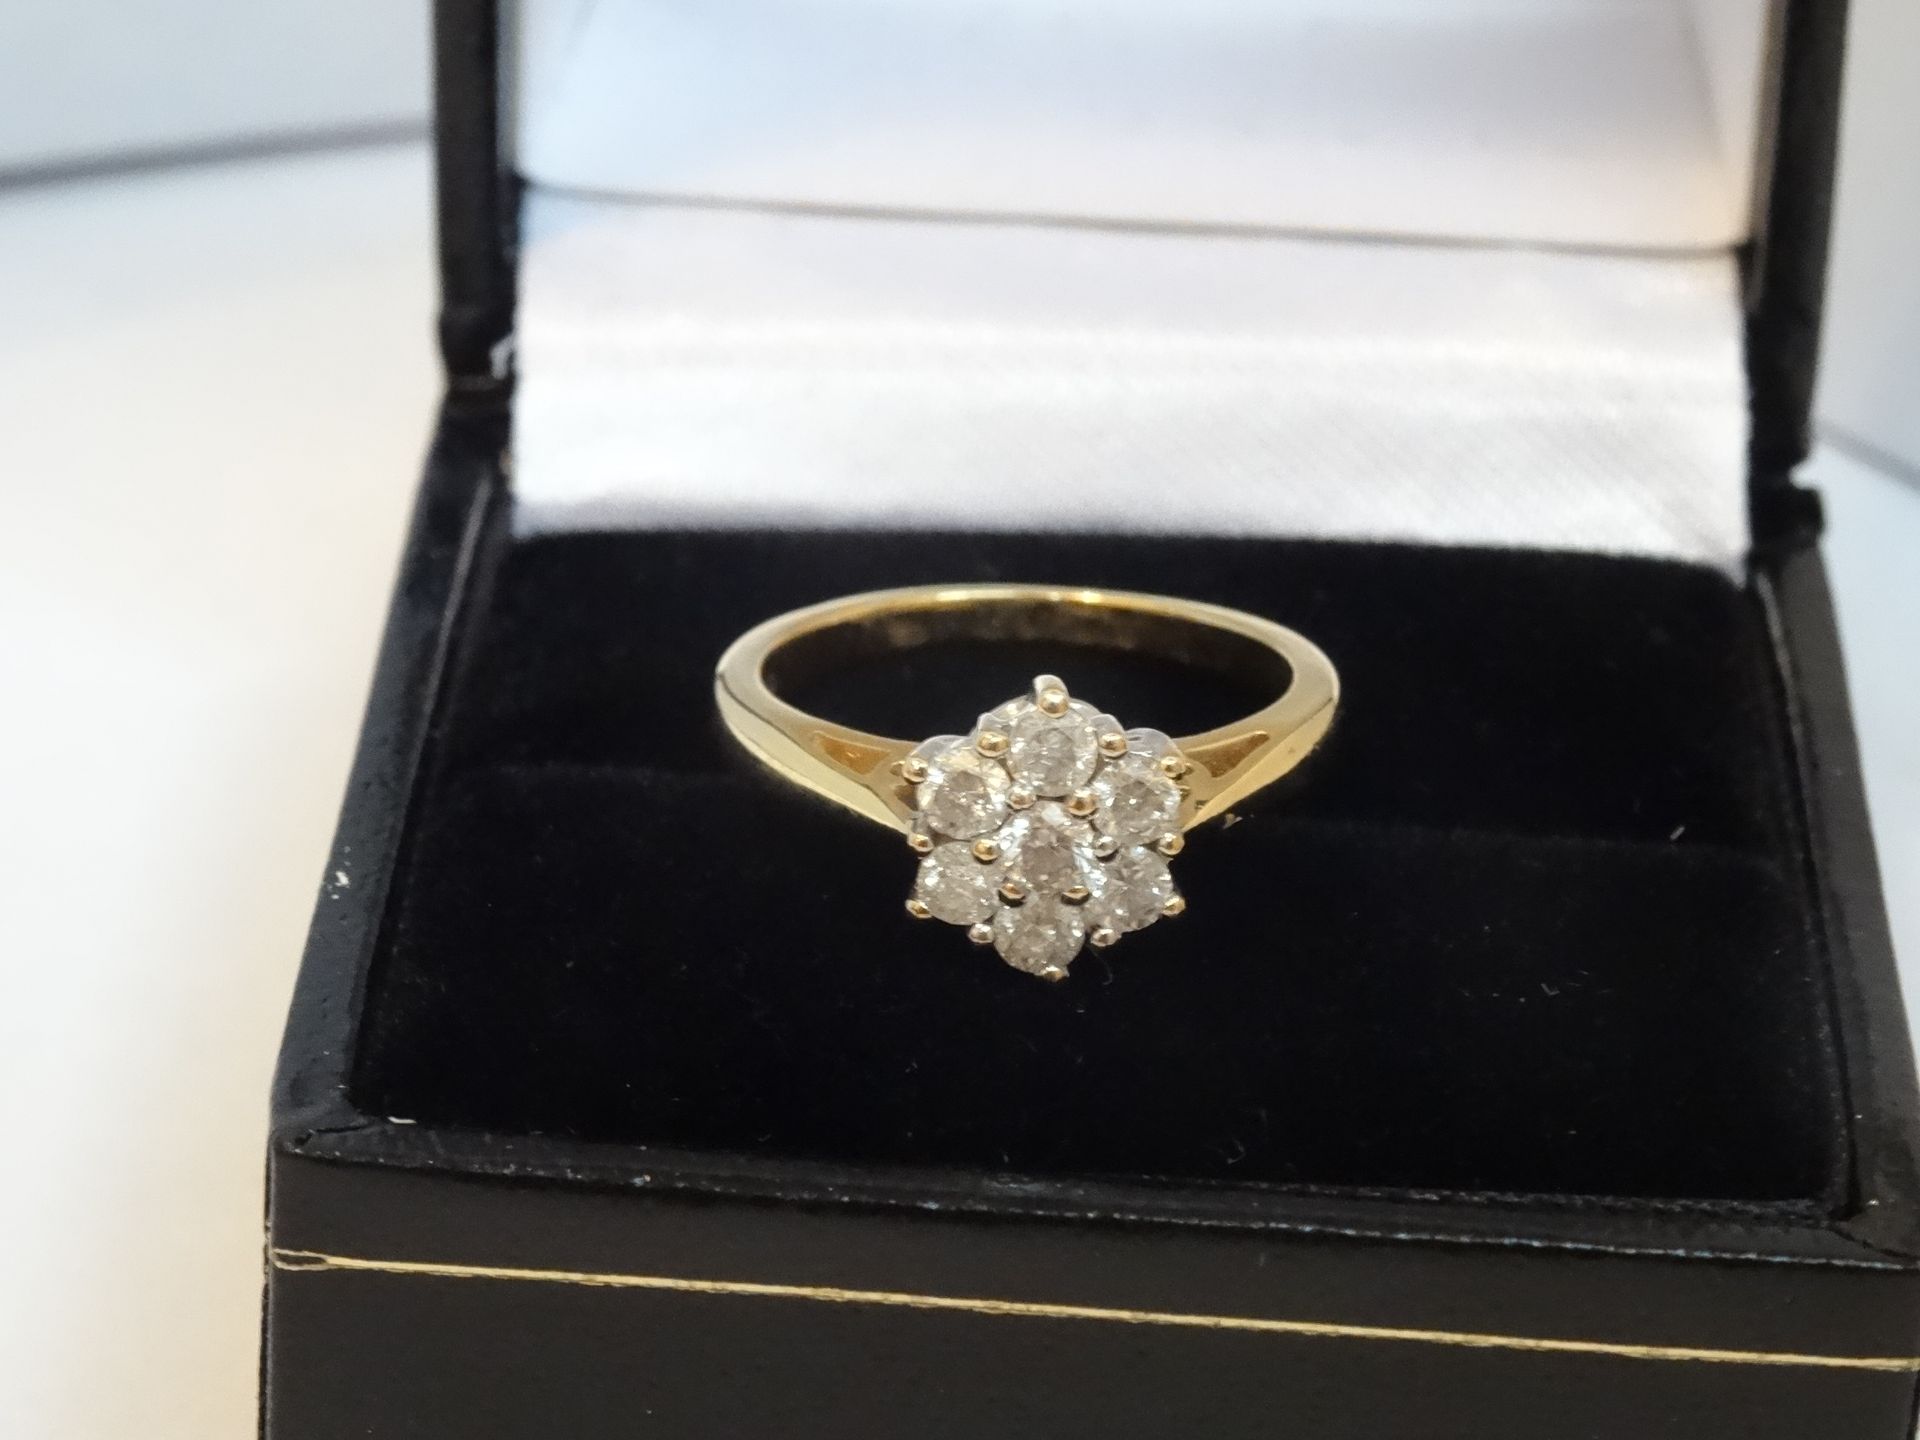 18ct Yellow & White Gold Ladies Diamond Cluster Ring, 0.5cts of diamonds, Insurance Valuation £1000 - Image 2 of 5